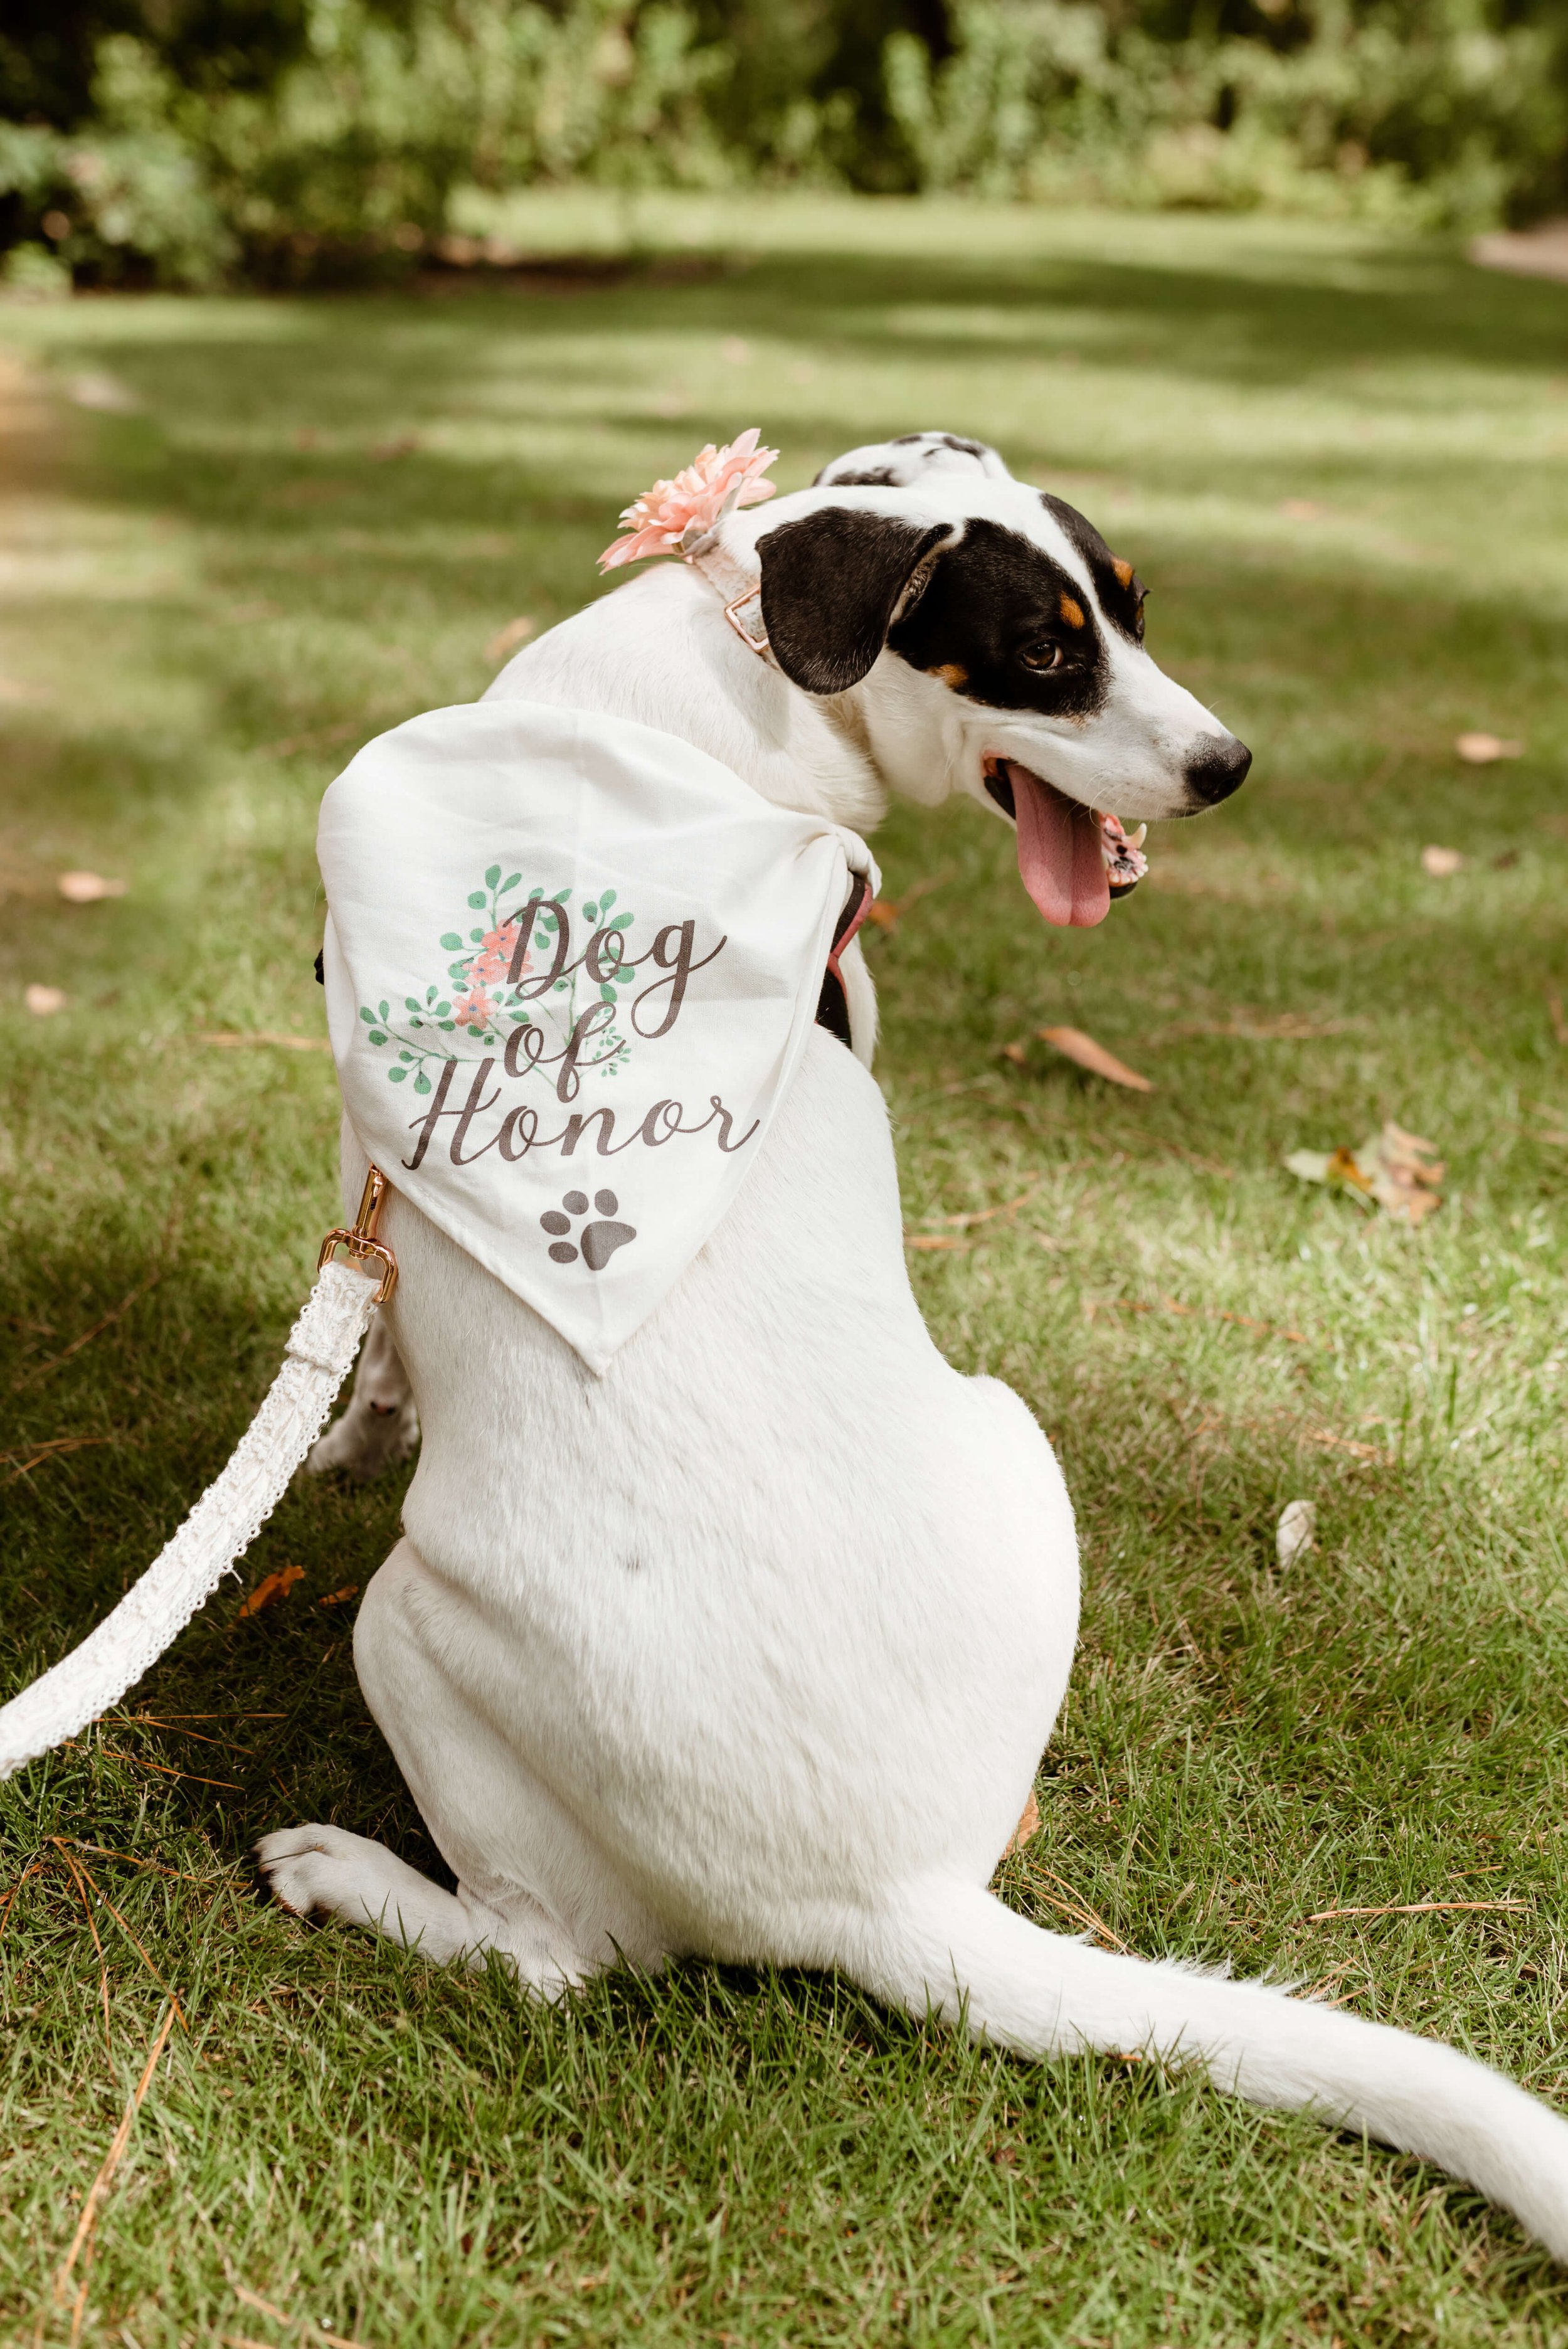 Dog portrait at Houston elopement photographed by J. Andrade Visual Arts | Houston Elopement and Dog photographer